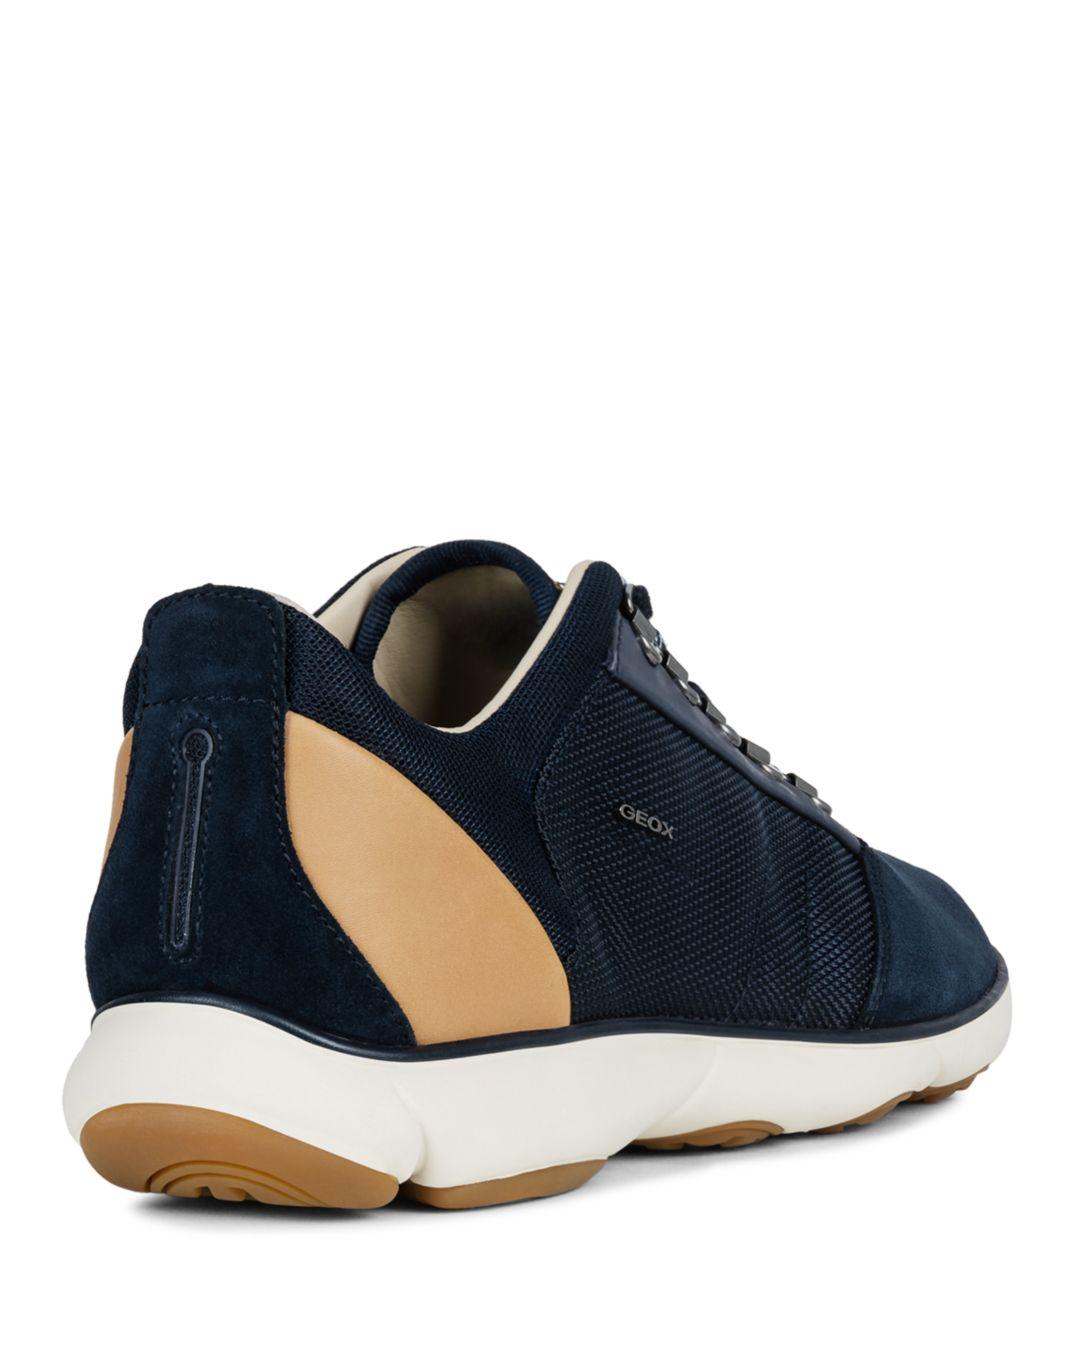 Geox Men's Nebula 56 Lace - Up Sneakers in Navy (Blue) for Men - Lyst